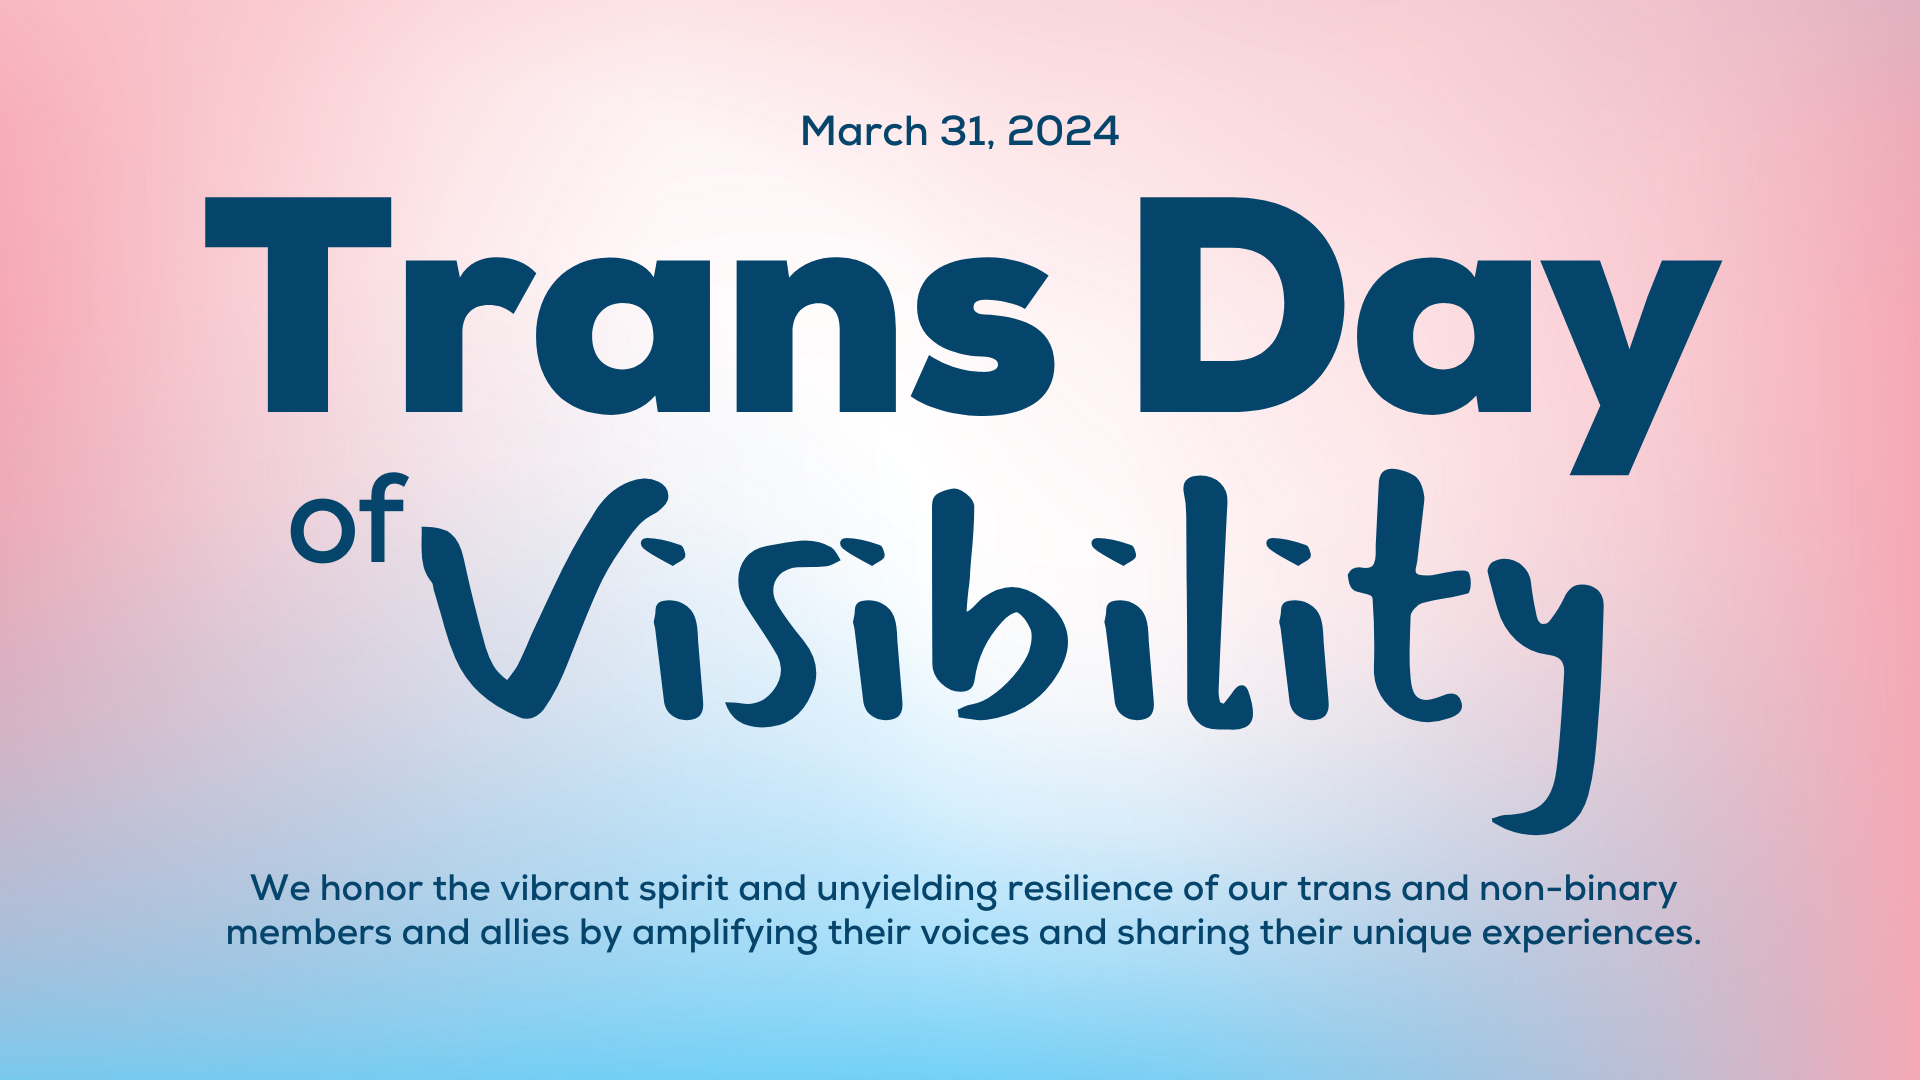 Transgender Day of Visibility: we honor the vibrant spirit and unyielding resilience of our trans and non-binary members and allies by amplifying their voices and sharing their unique experiences.